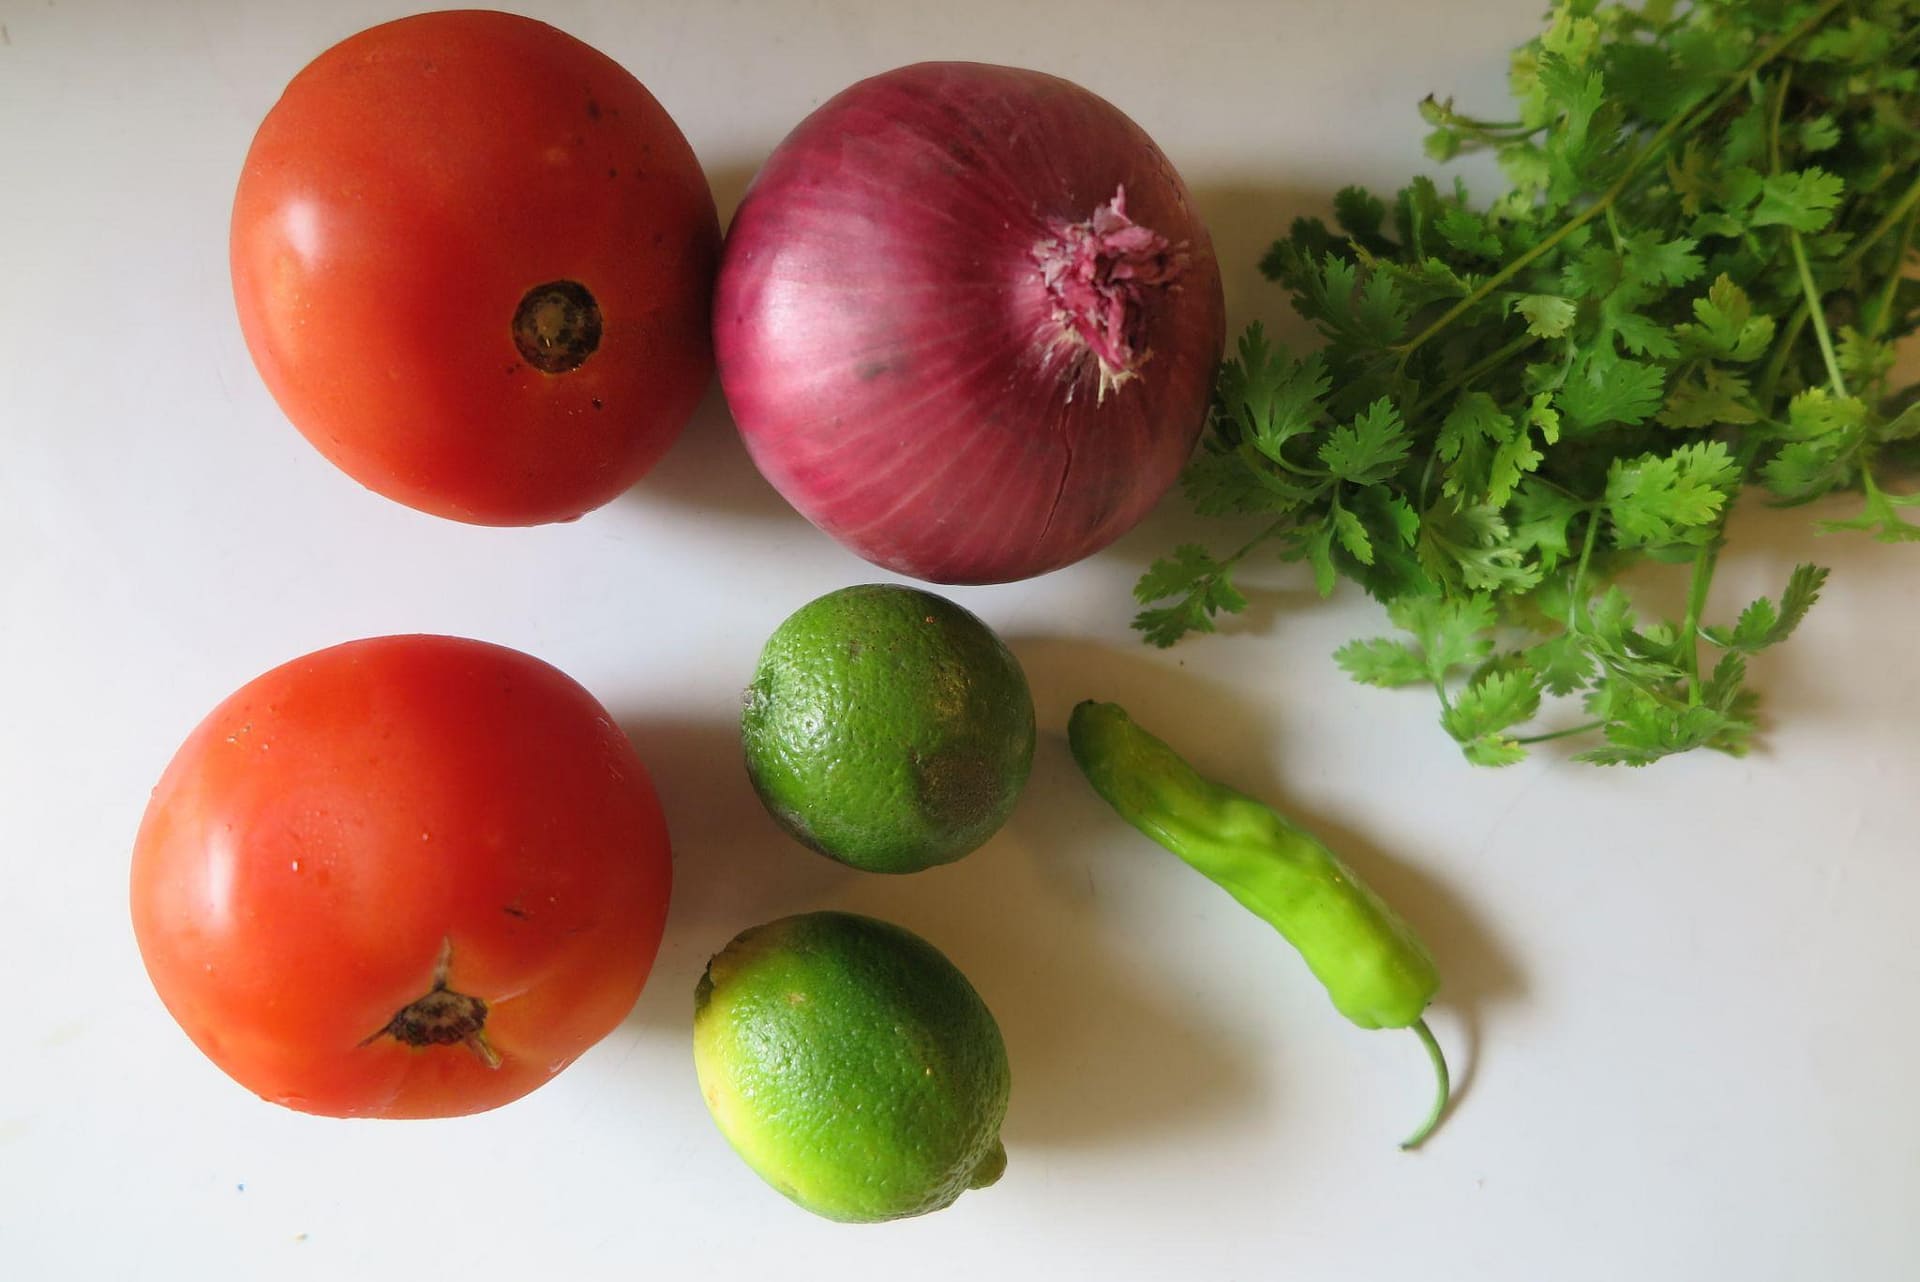 Tomatoes, red onion, limes, cilantro, and a jalapeno on a white background